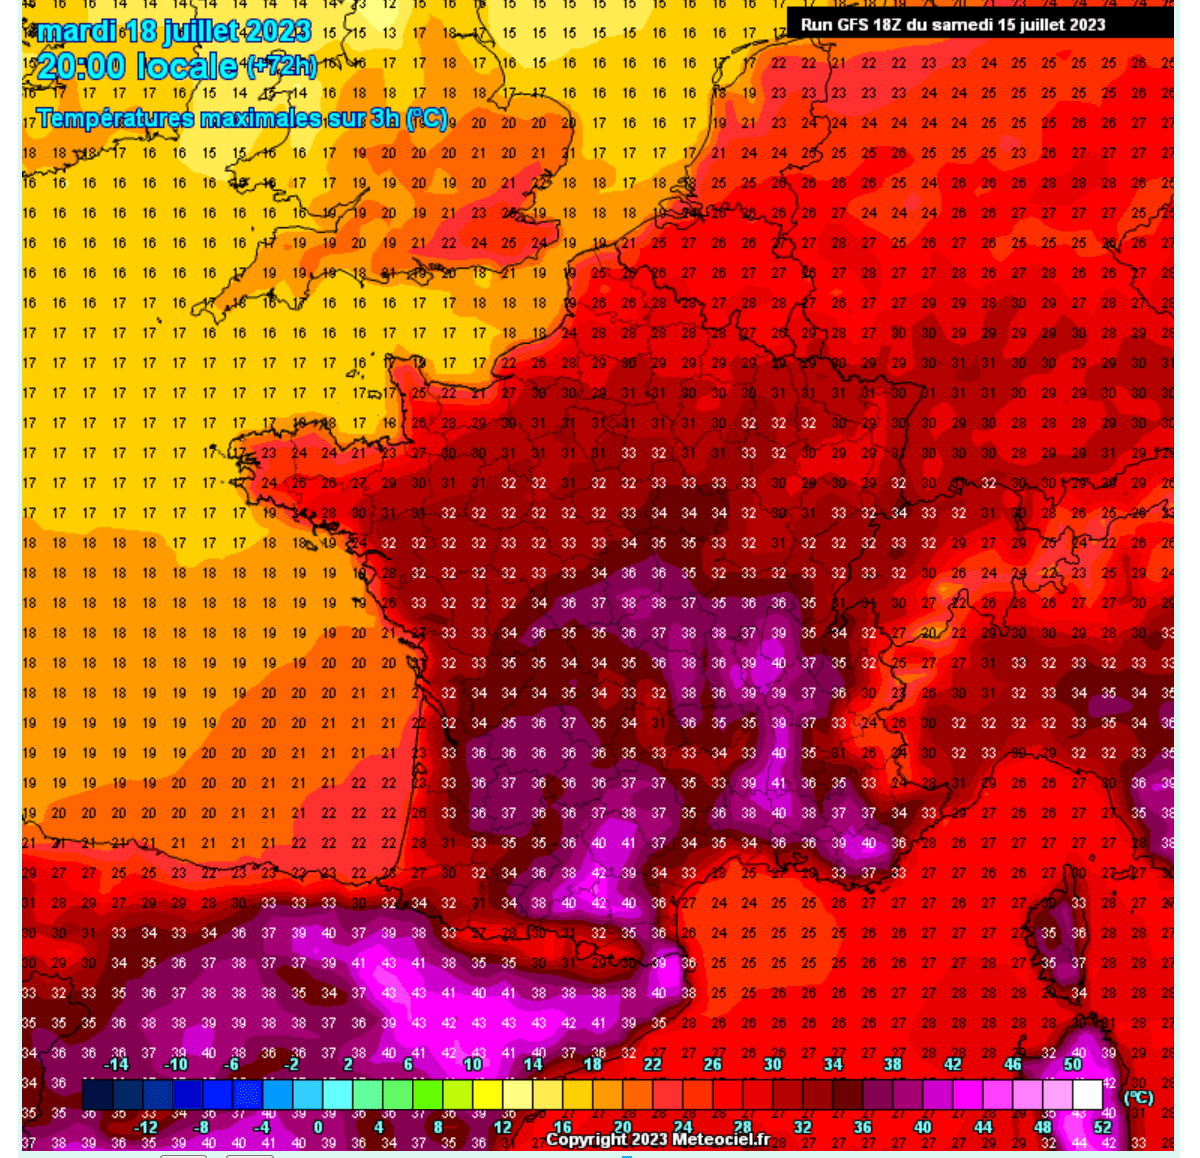 heatwave-europe-heat-dome-spain-italy-greece-summer-2023-france-temperature